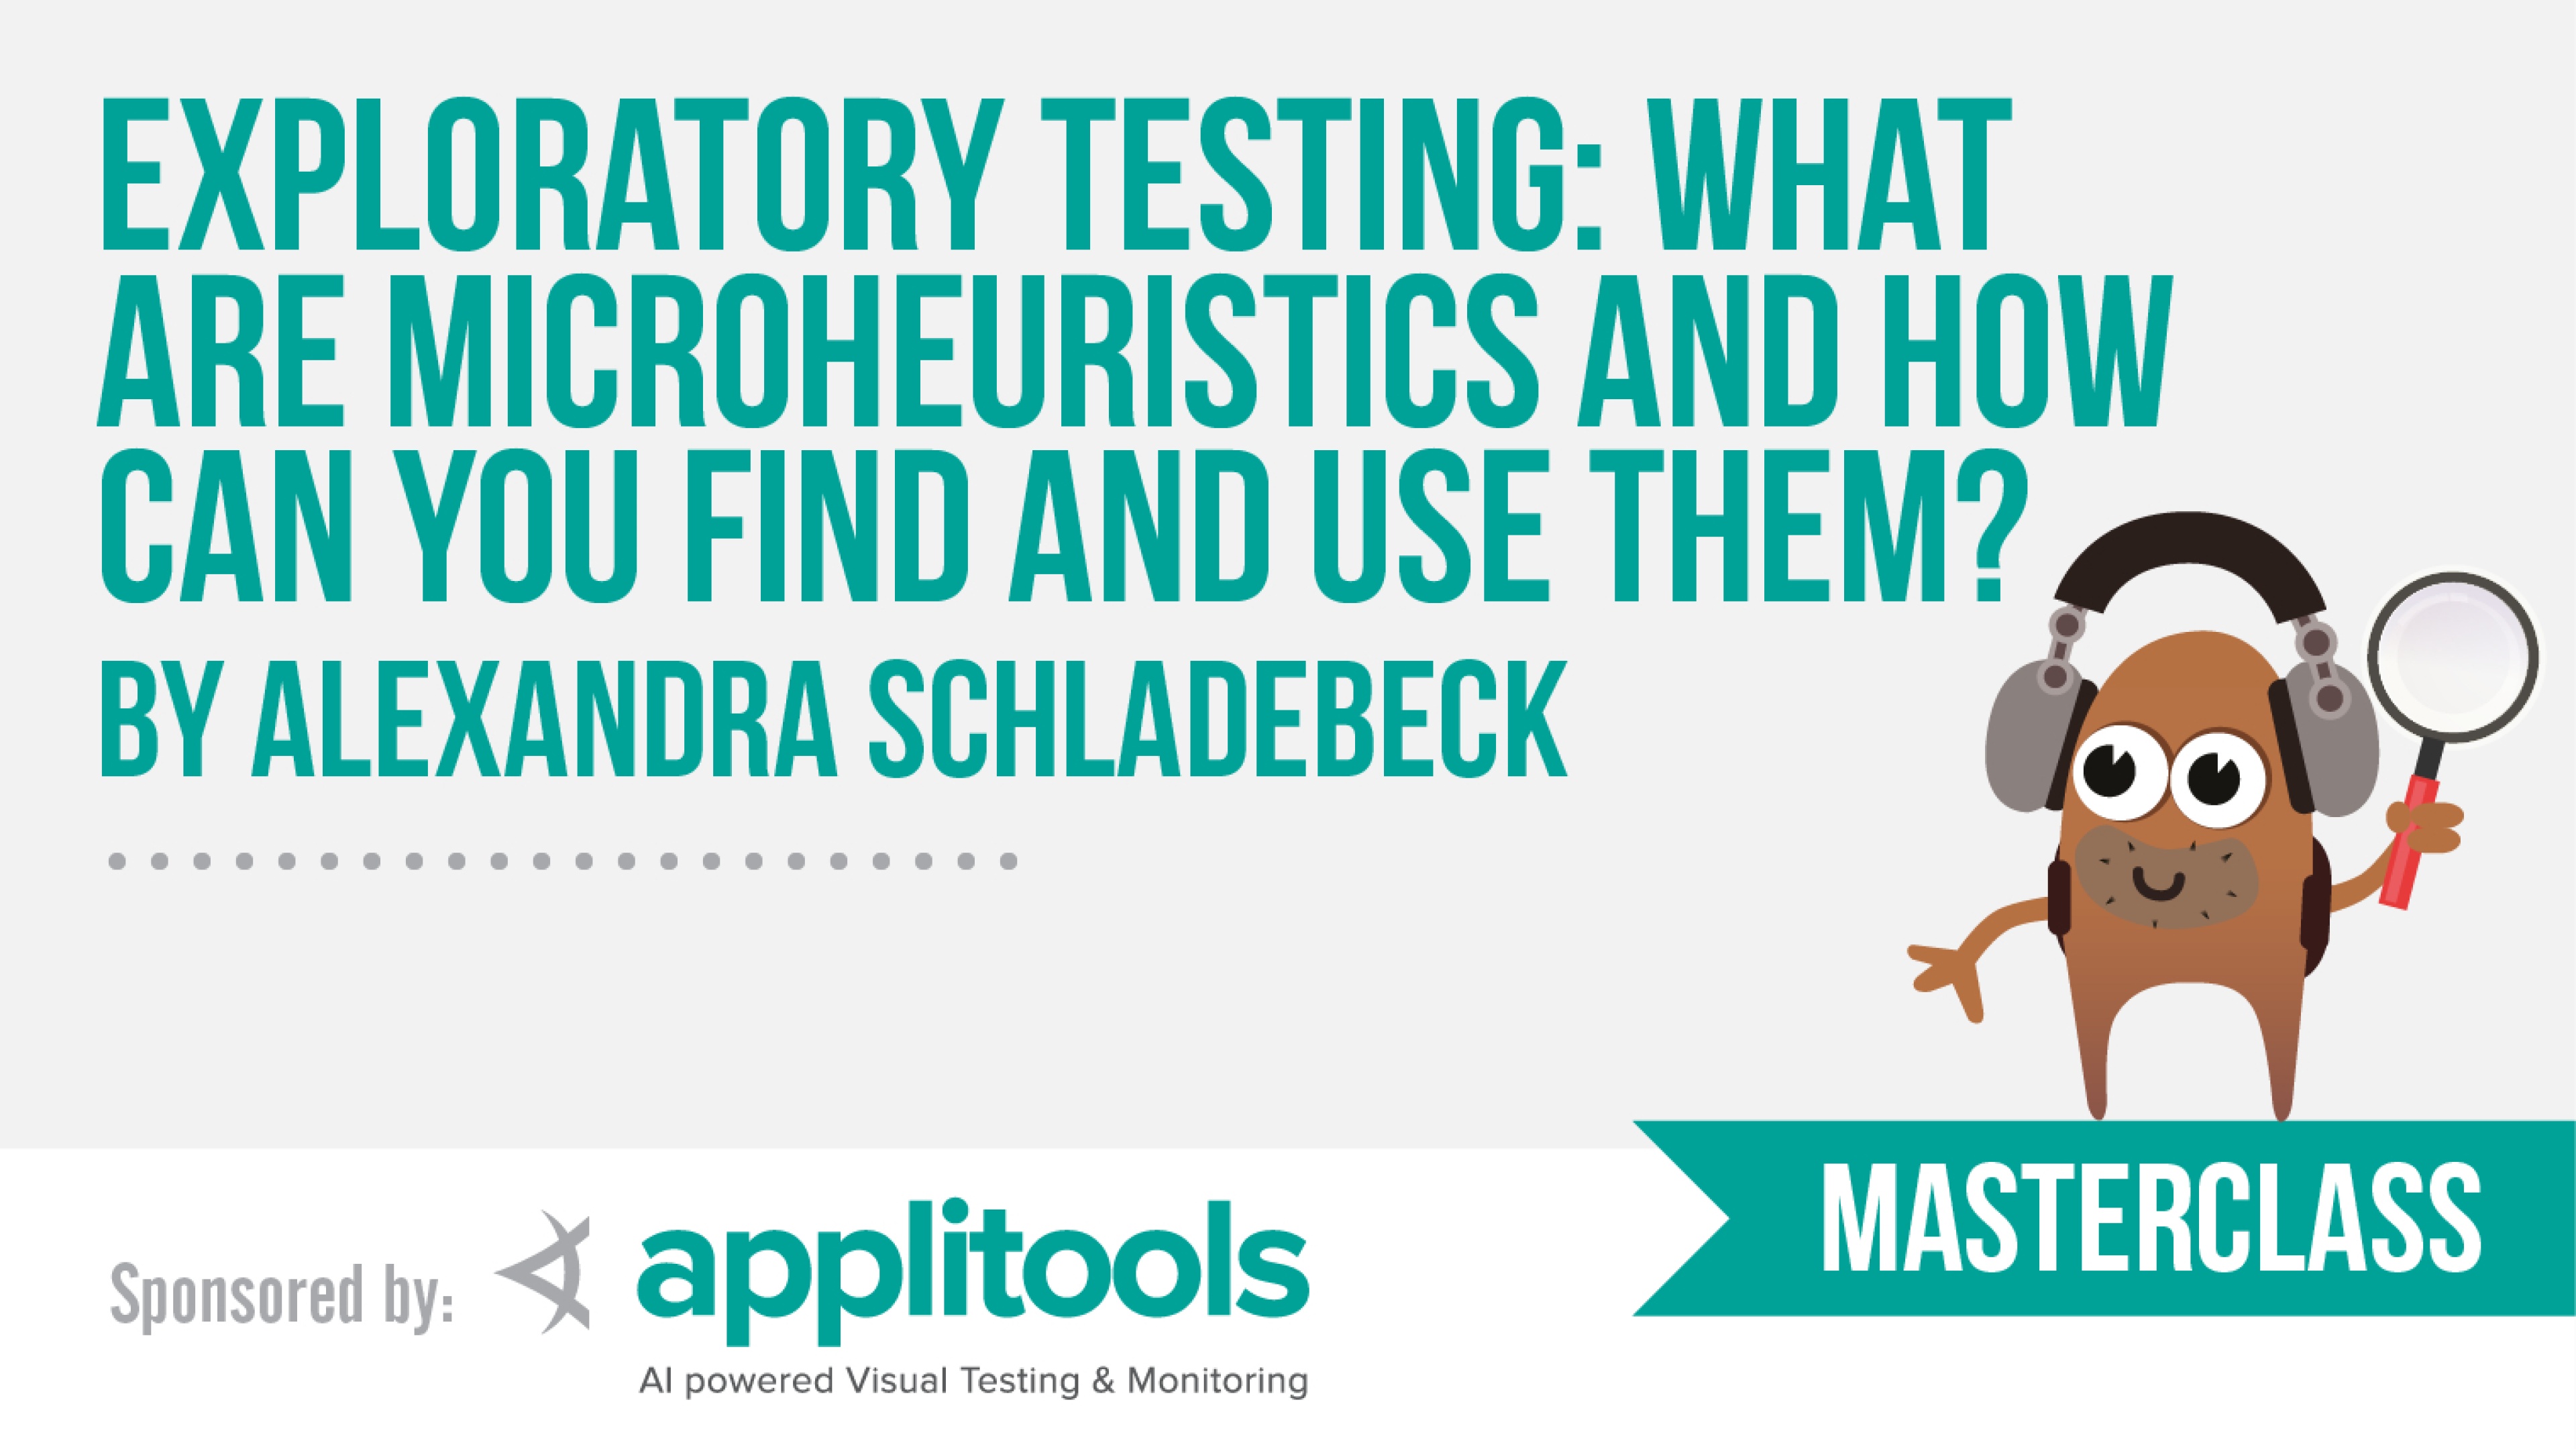 Exploratory Testing: What are microheuristics and how can you find and use them? with Alexandra Schladebeck